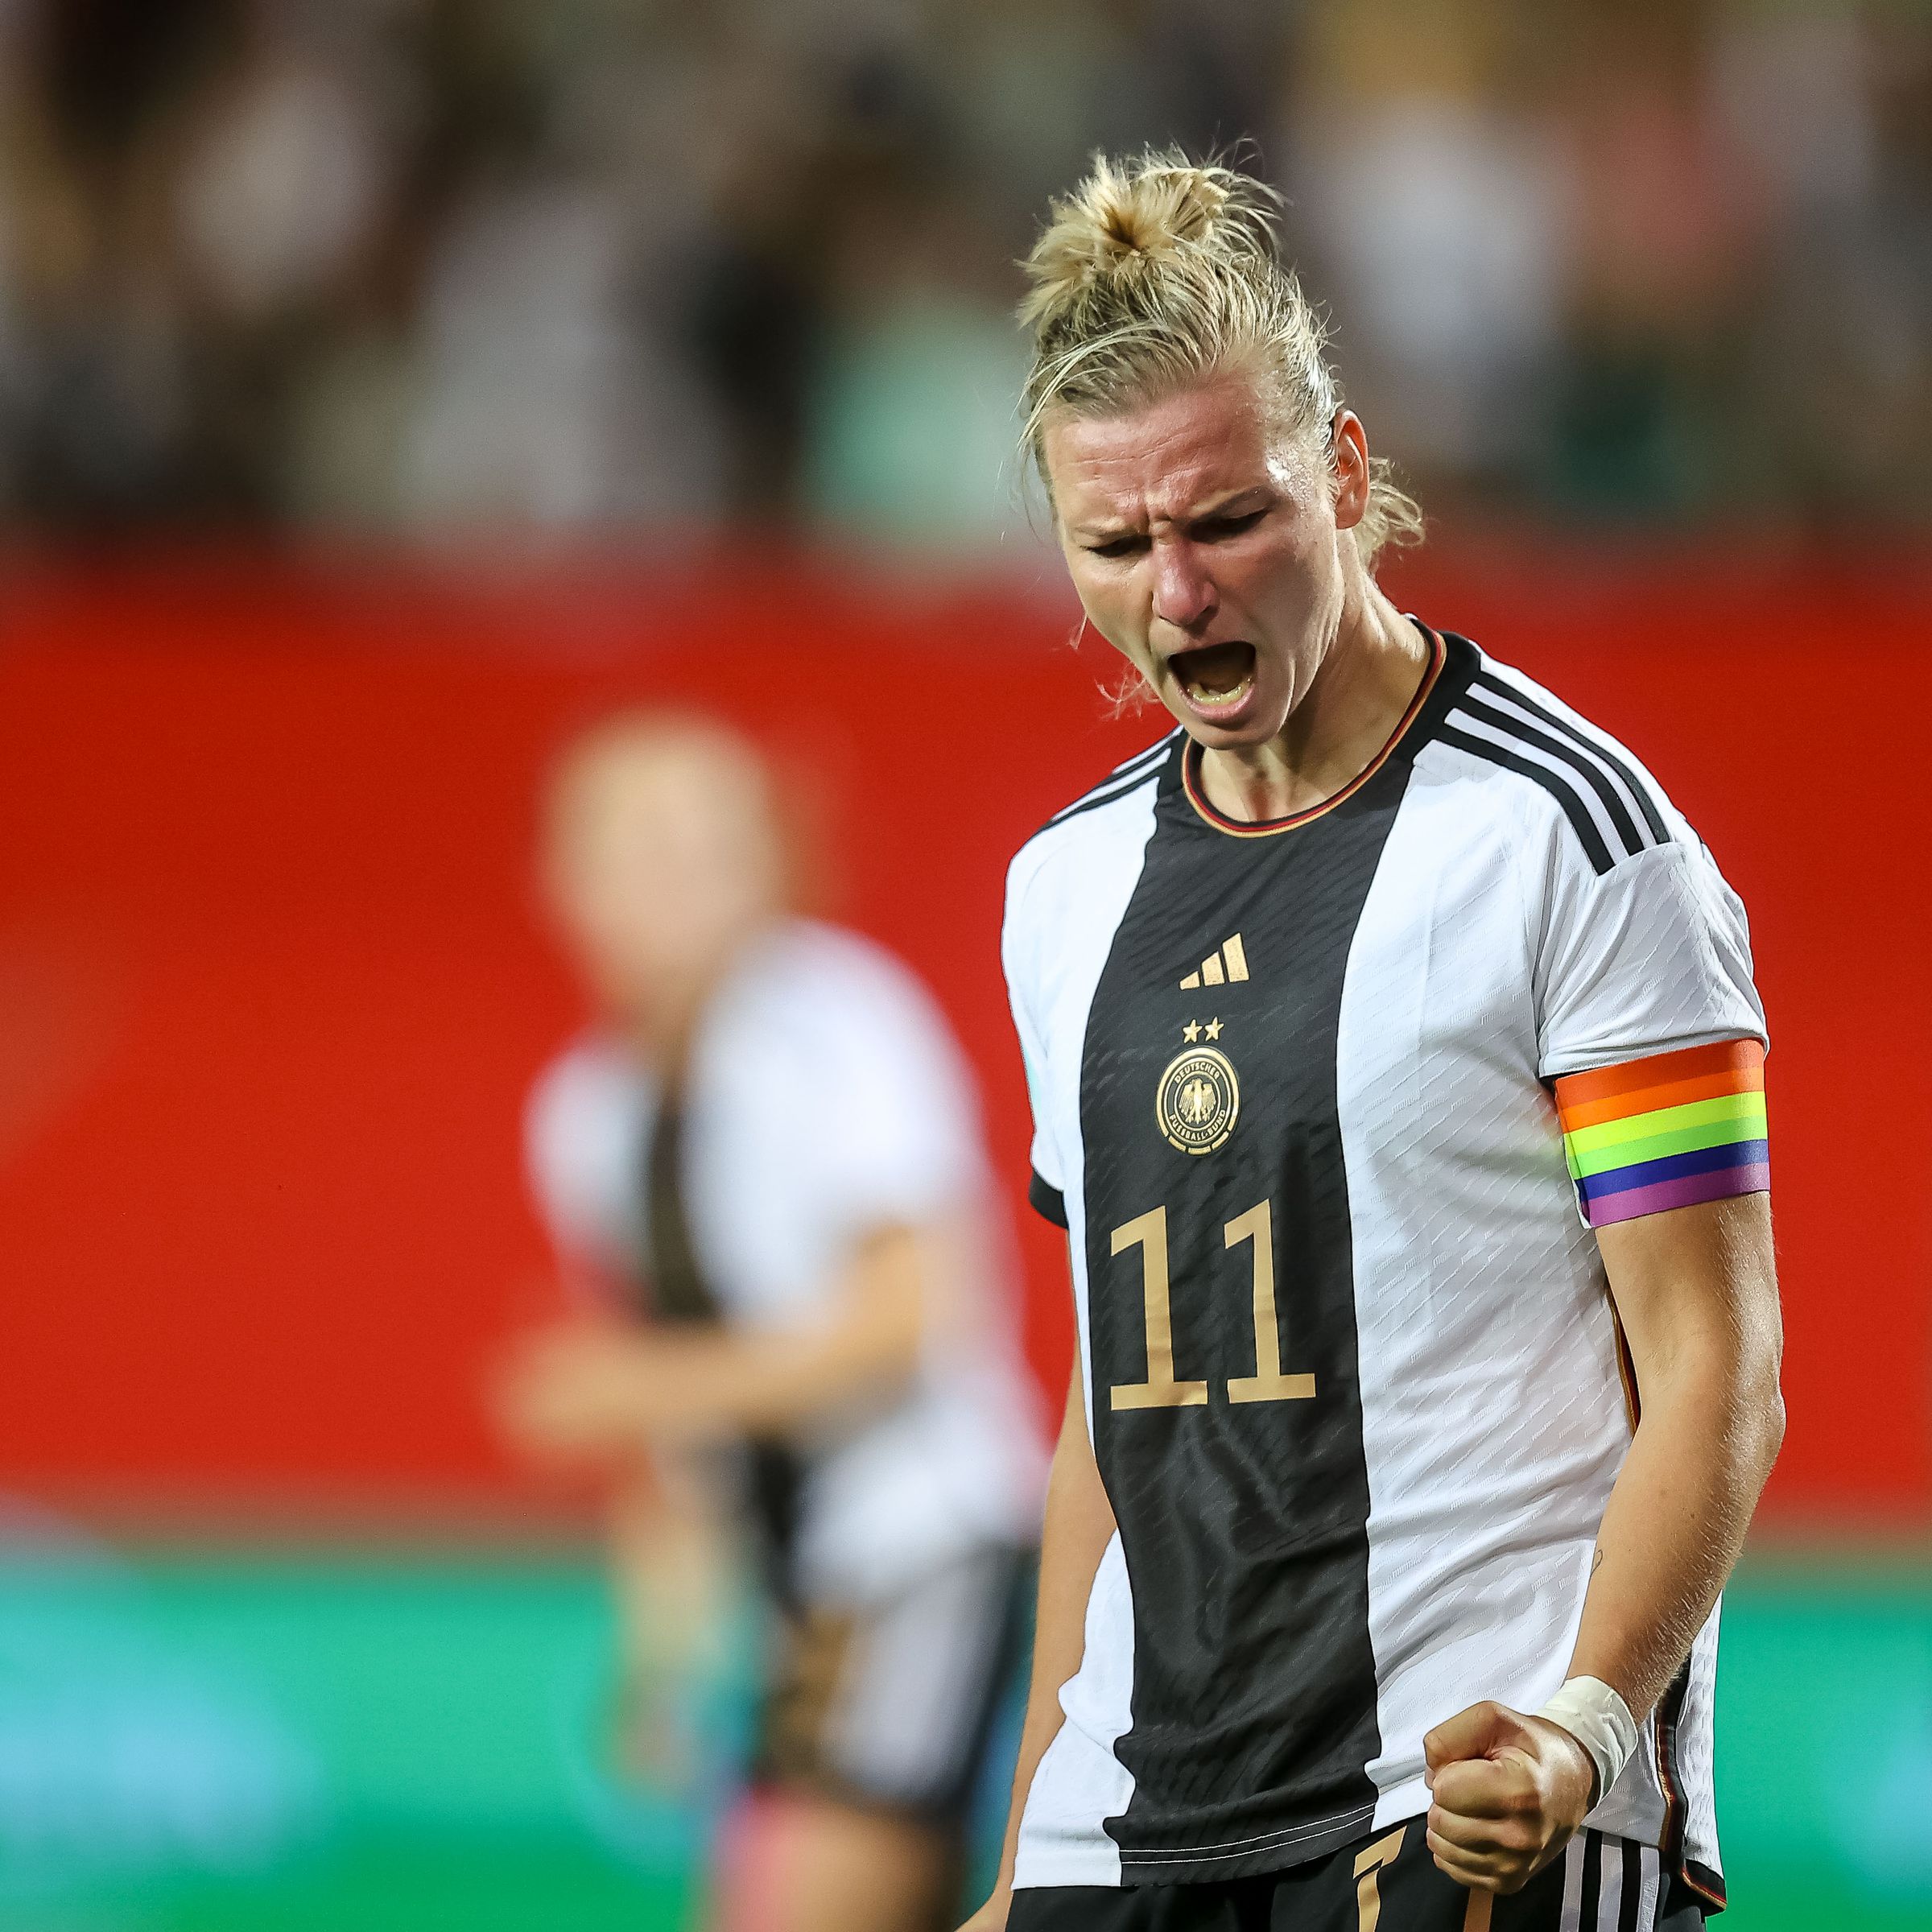 A photo of Alexandra Popp in a friendly match between Germany and Zambia.